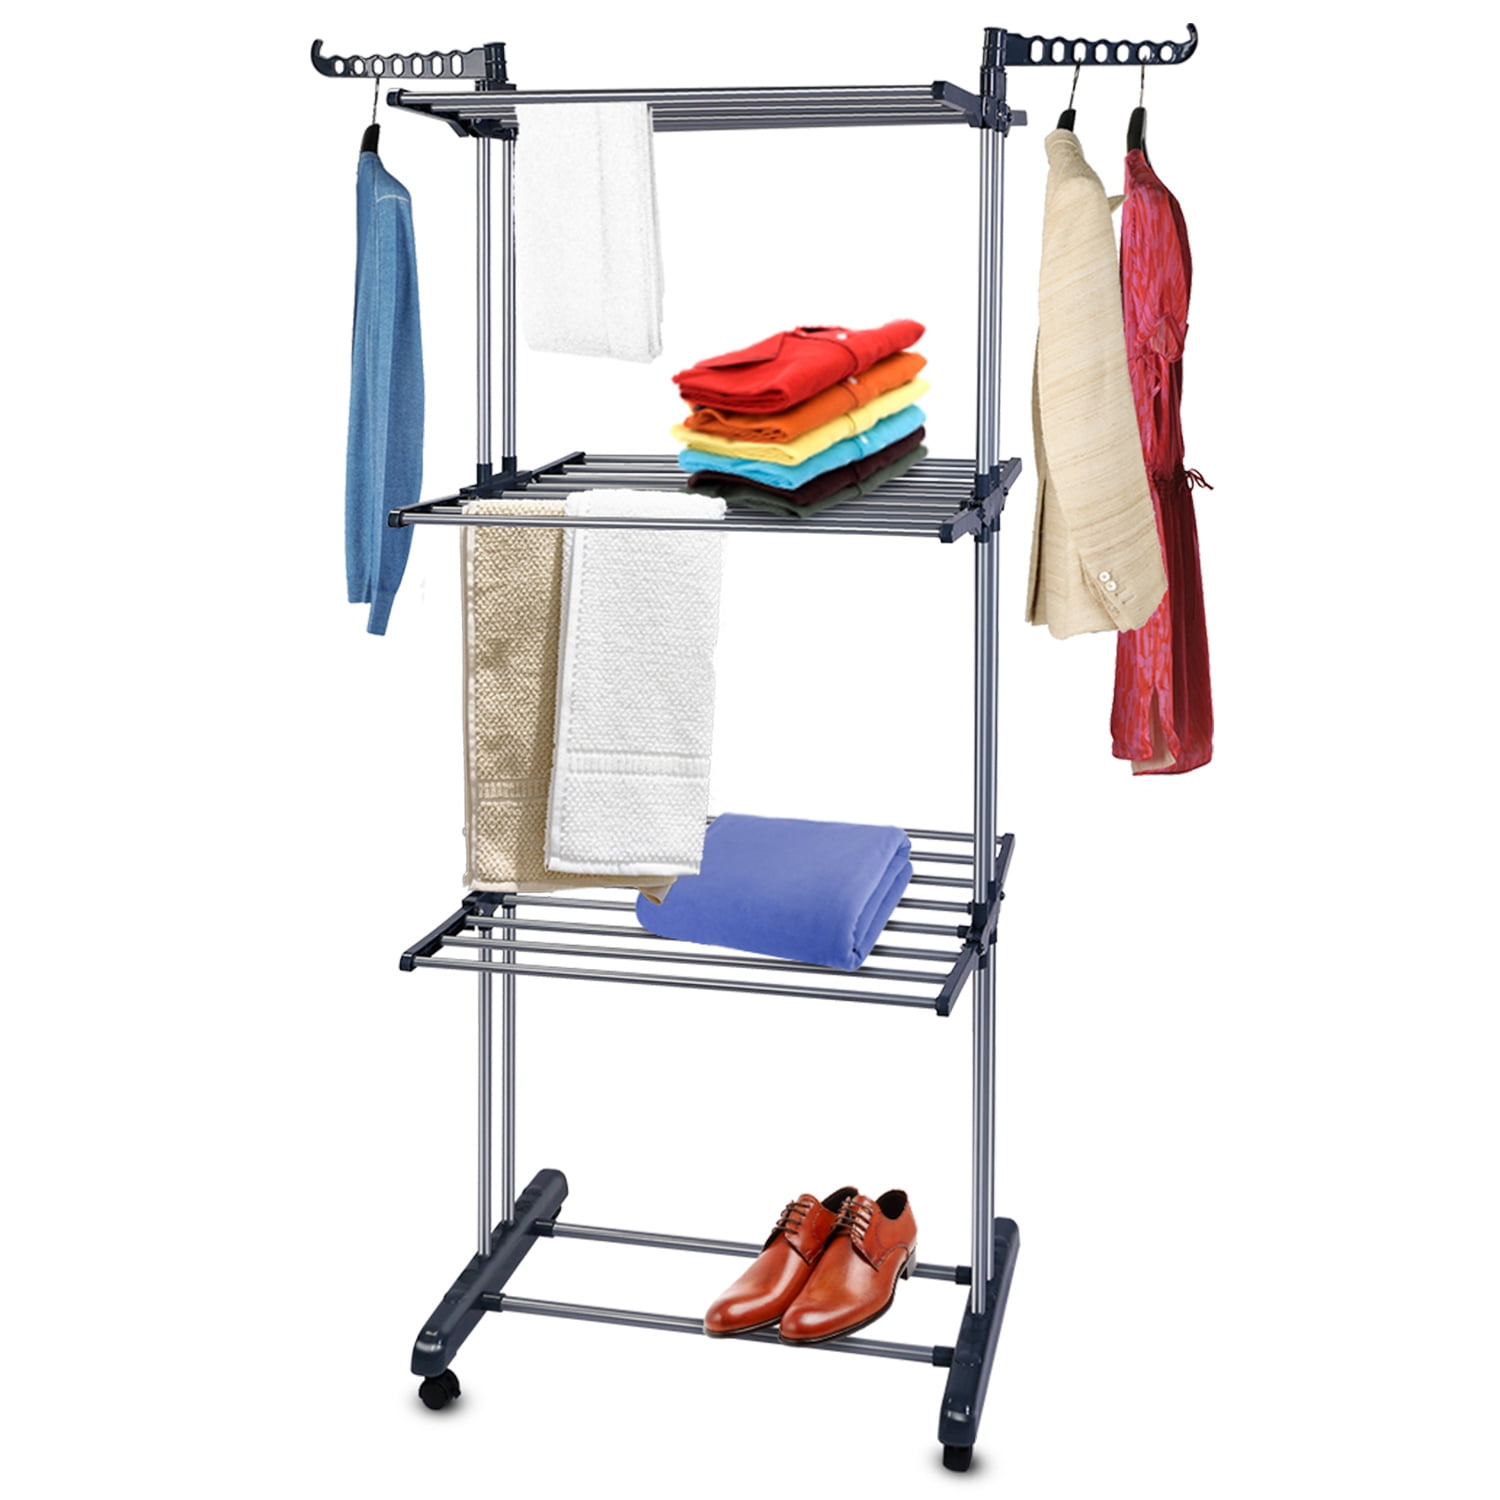 Dropship 5-Tier Hanging Laundry Drying Rack Aluminum to Sell Online at a  Lower Price